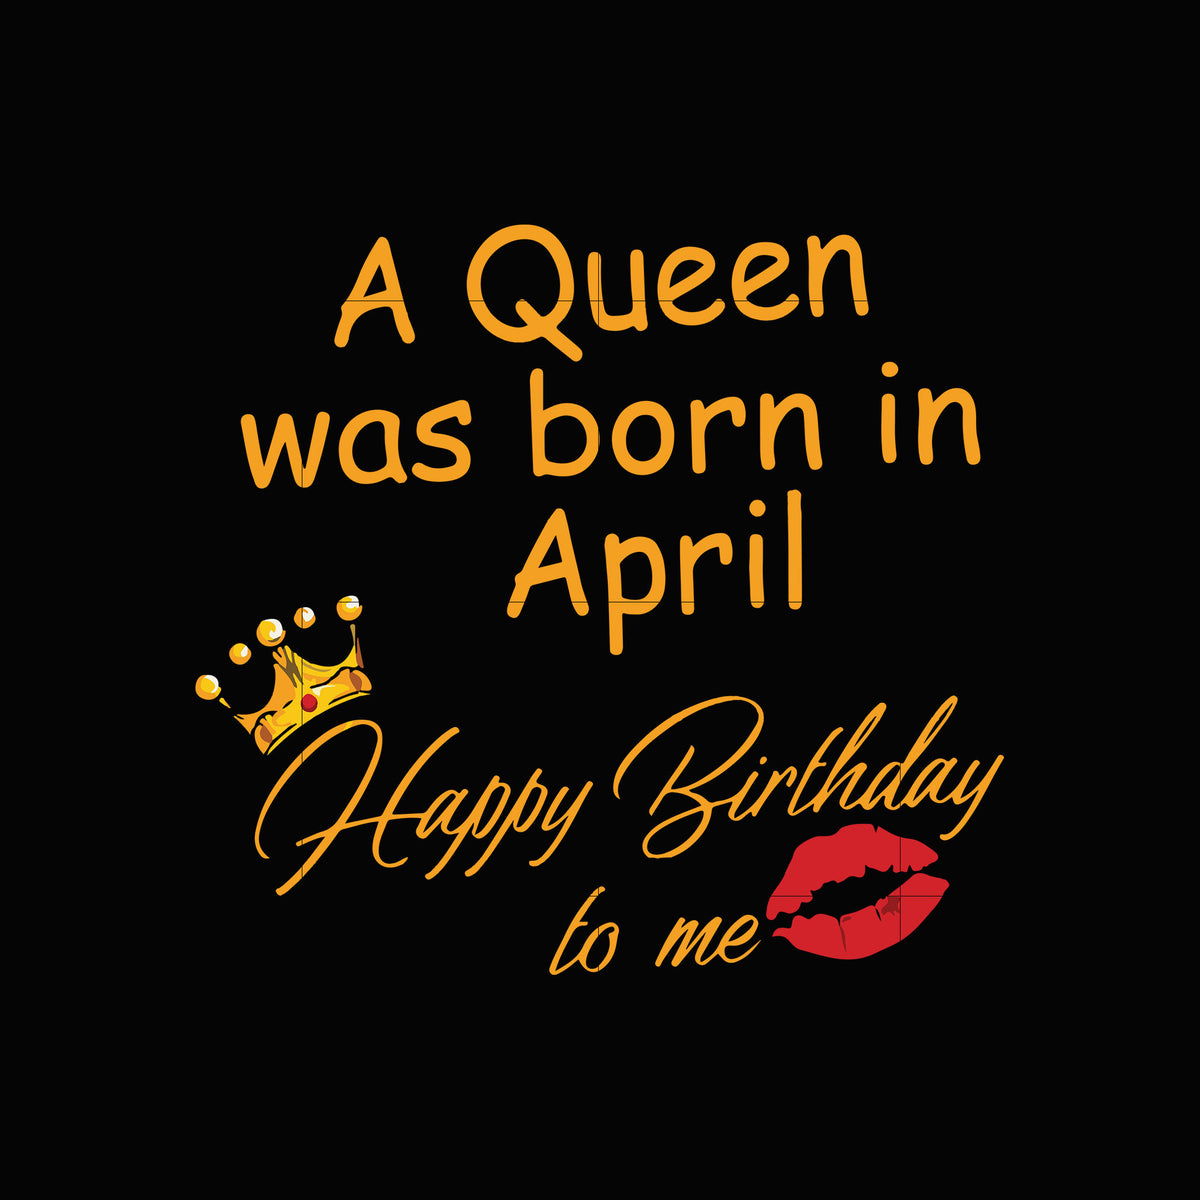 Download A Queen was born in April happy birthday to me svg,dxf,eps ...